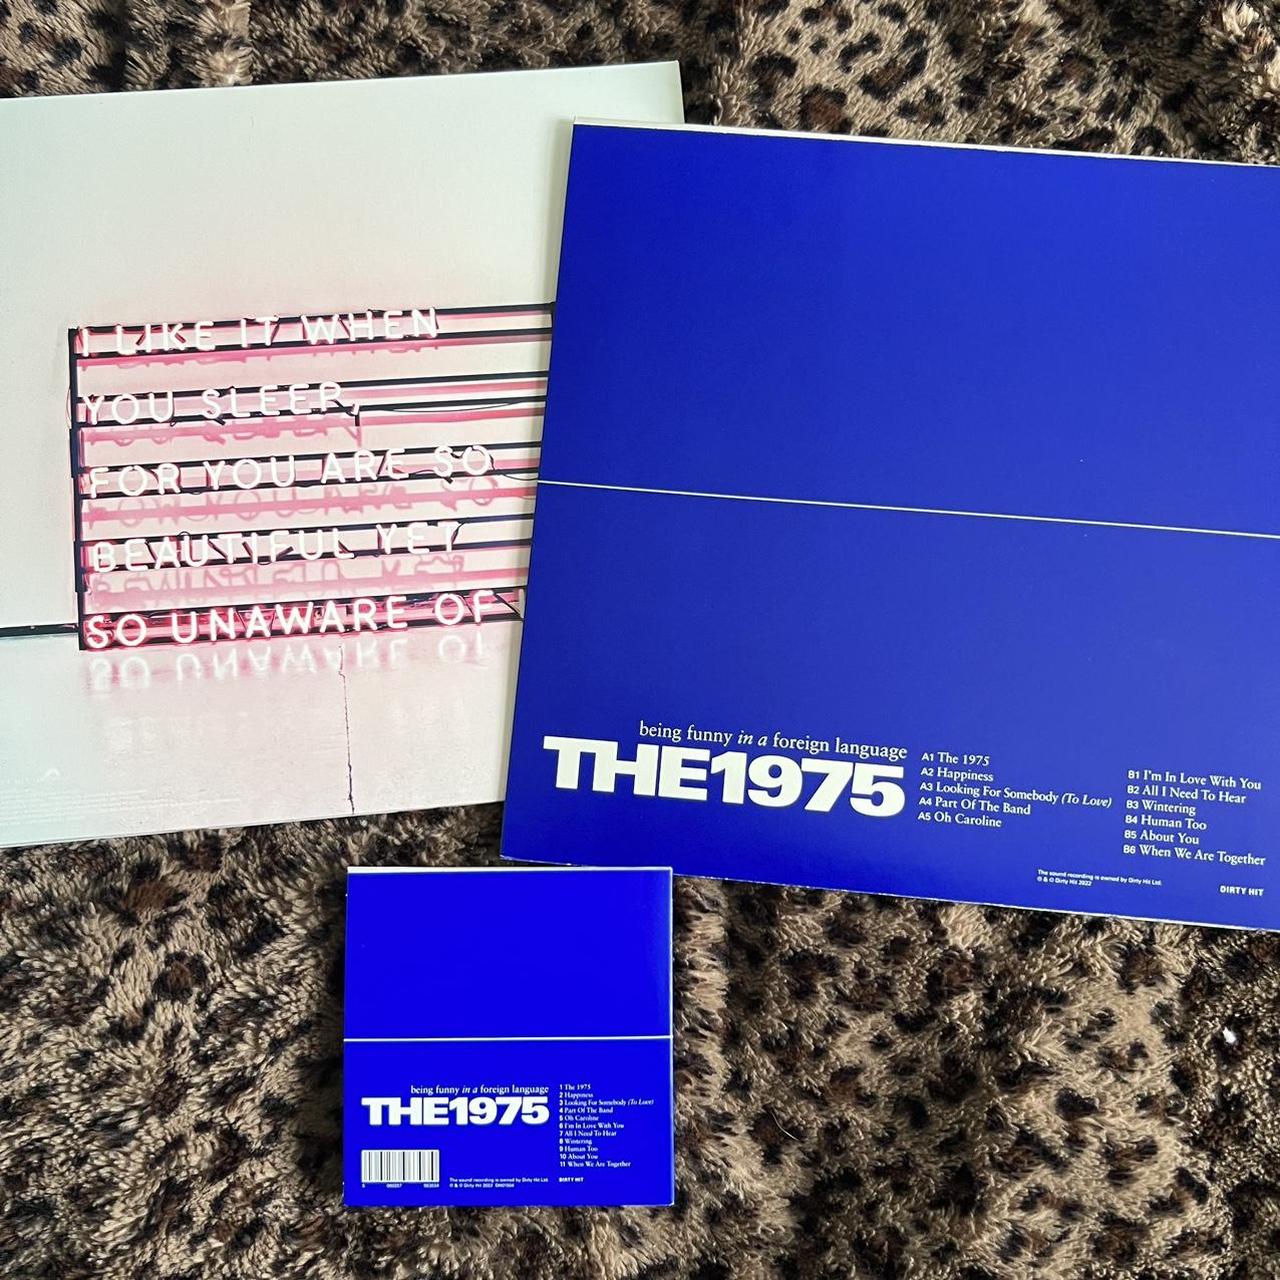 White and Blue Cds-and-vinyl (2)